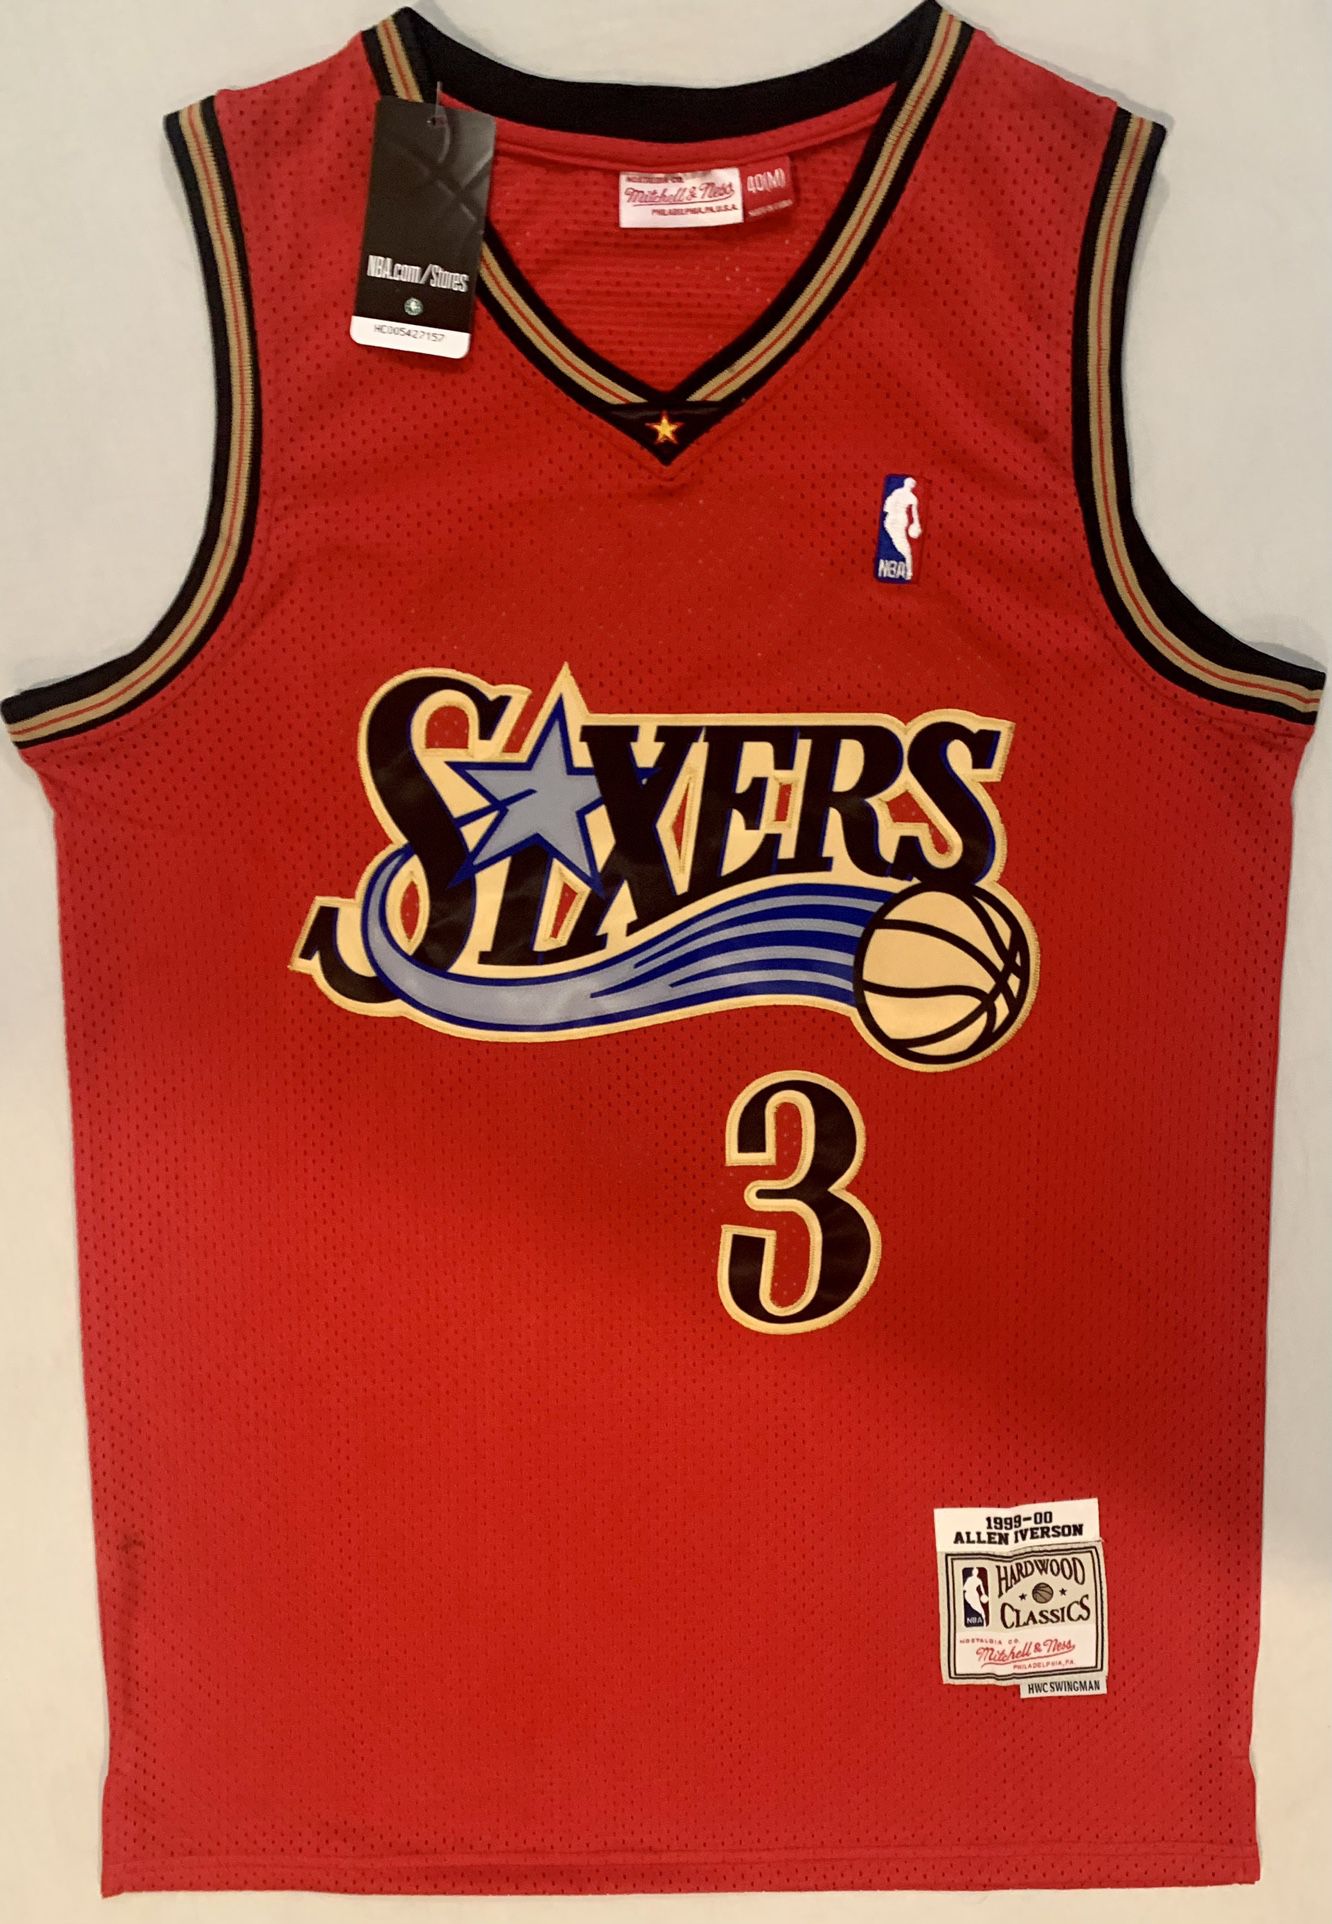 Allen Iverson 76ers NBA Jersey for Sale in Lakewood, CA - OfferUp